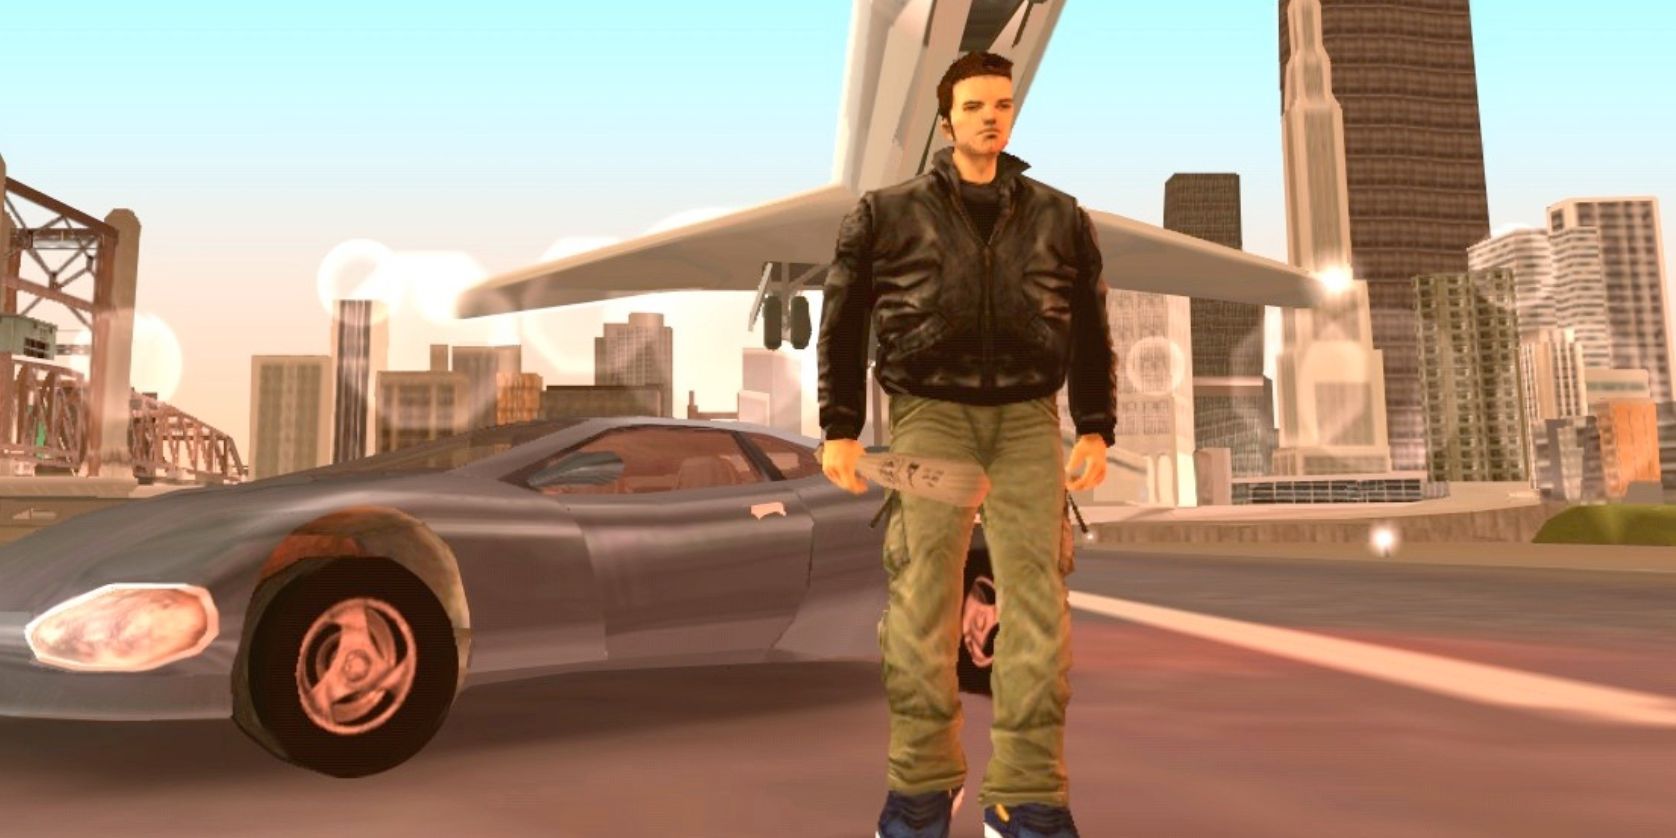 GTA character standing in front of a car